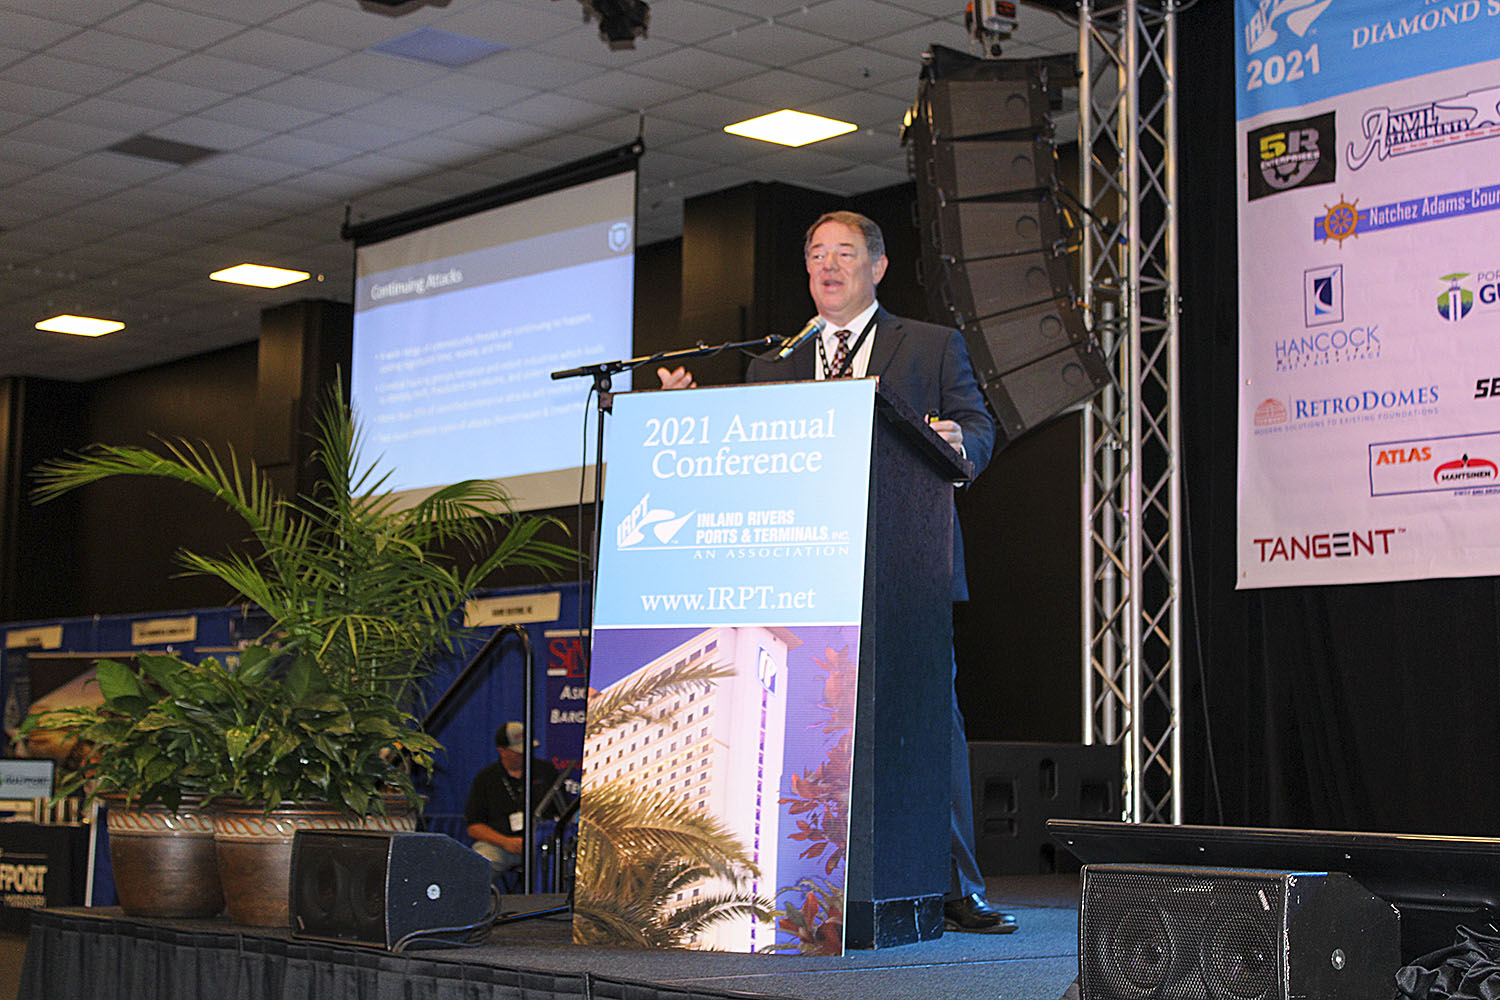 David Wren, president and CEO of Network Technology Partners, speaks during the recent Inland Rivers, Ports and Terminals conference in Biloxi, Miss. (Photo by Dee Dee Whittaker)